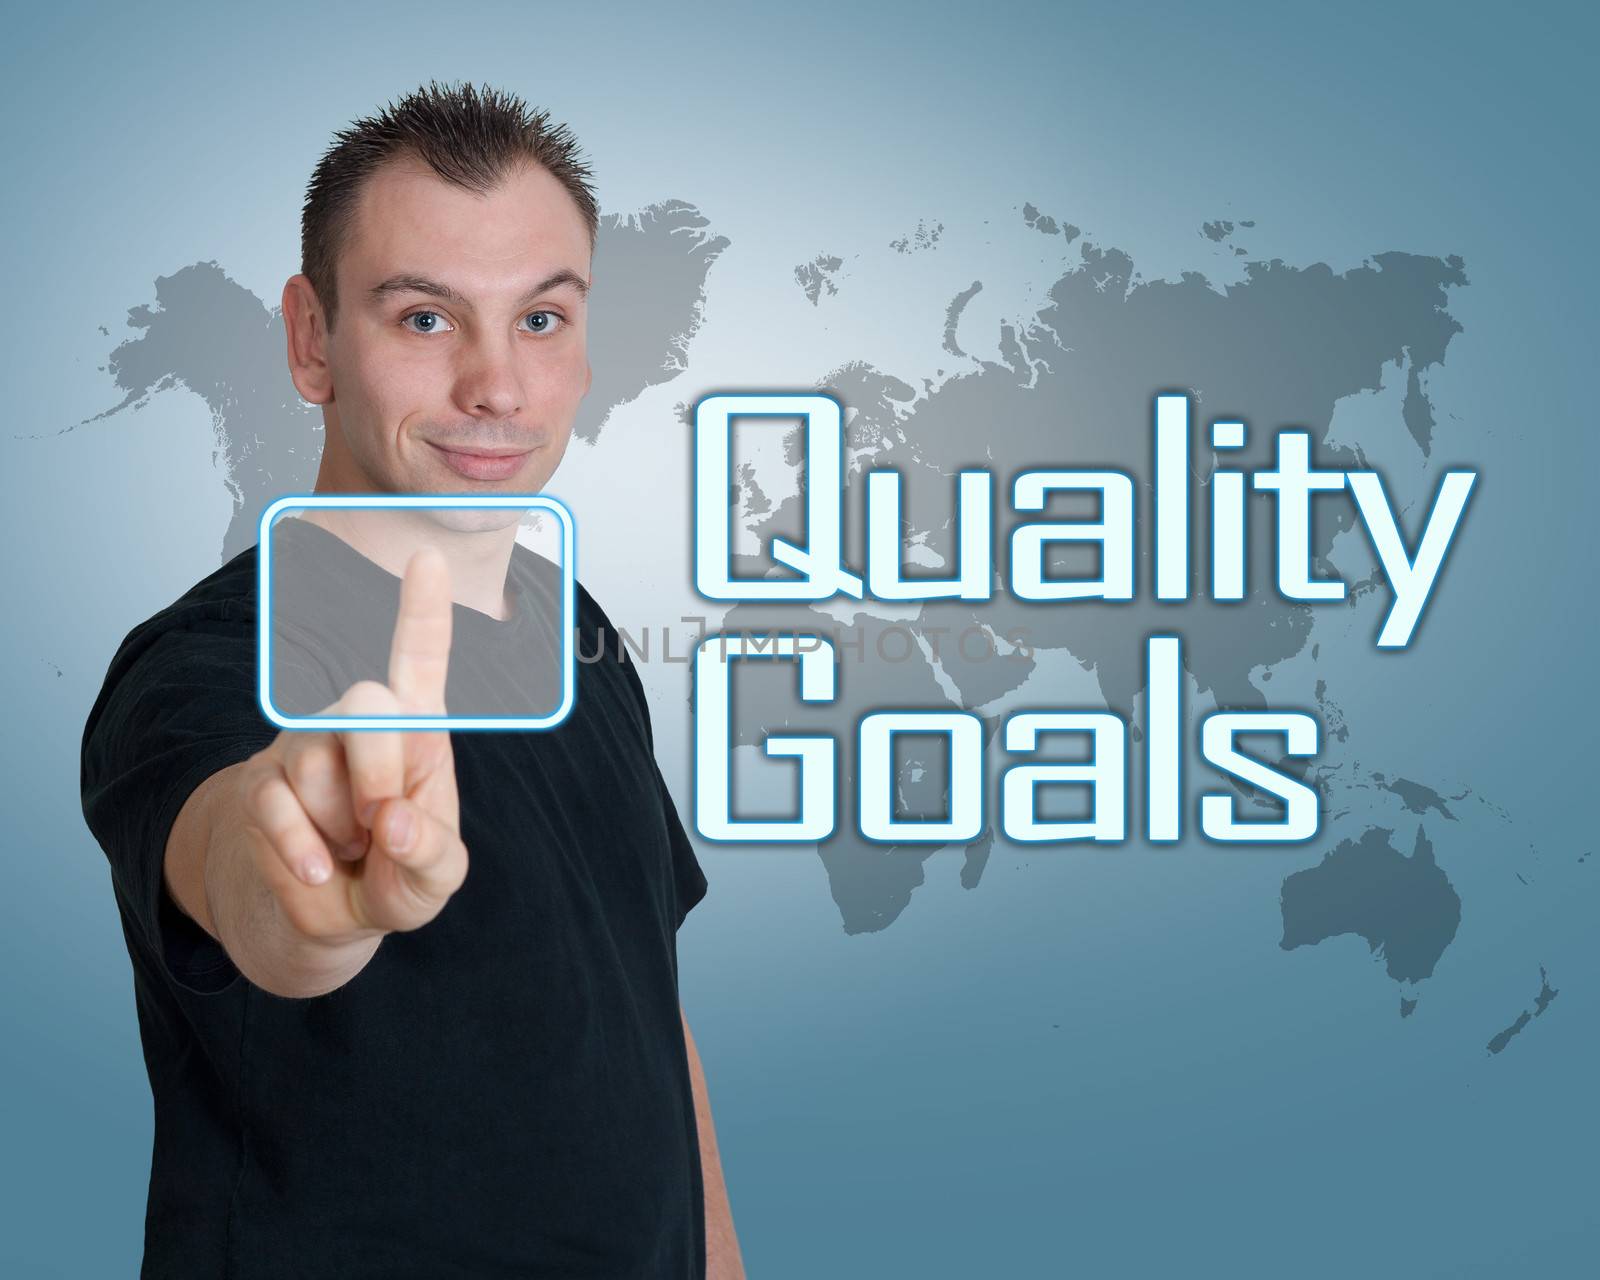 Young man press digital Quality Goals button on interface in front of him